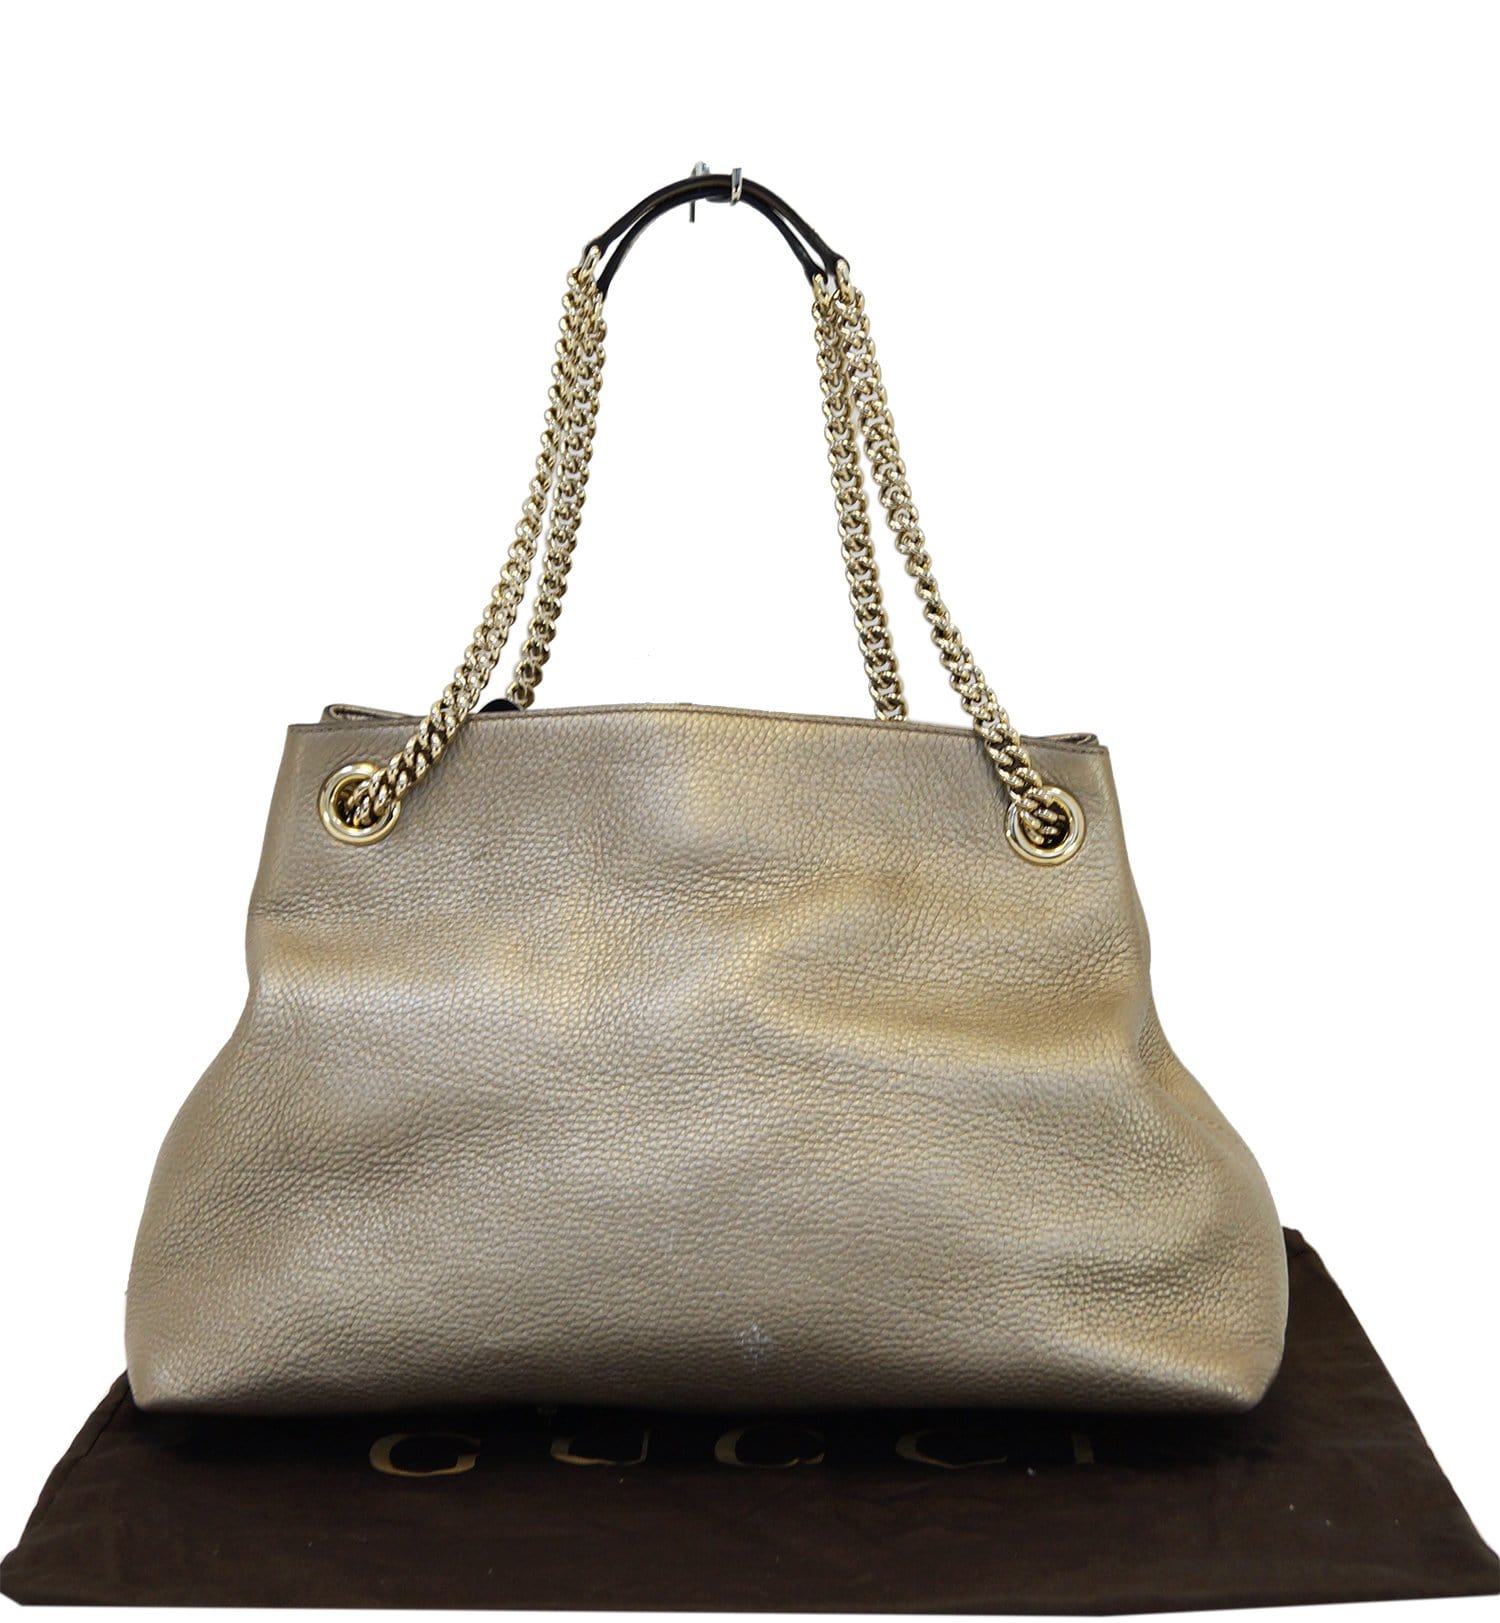 Gucci Soho Tote Bag in Gold Pebbled Leather Chain